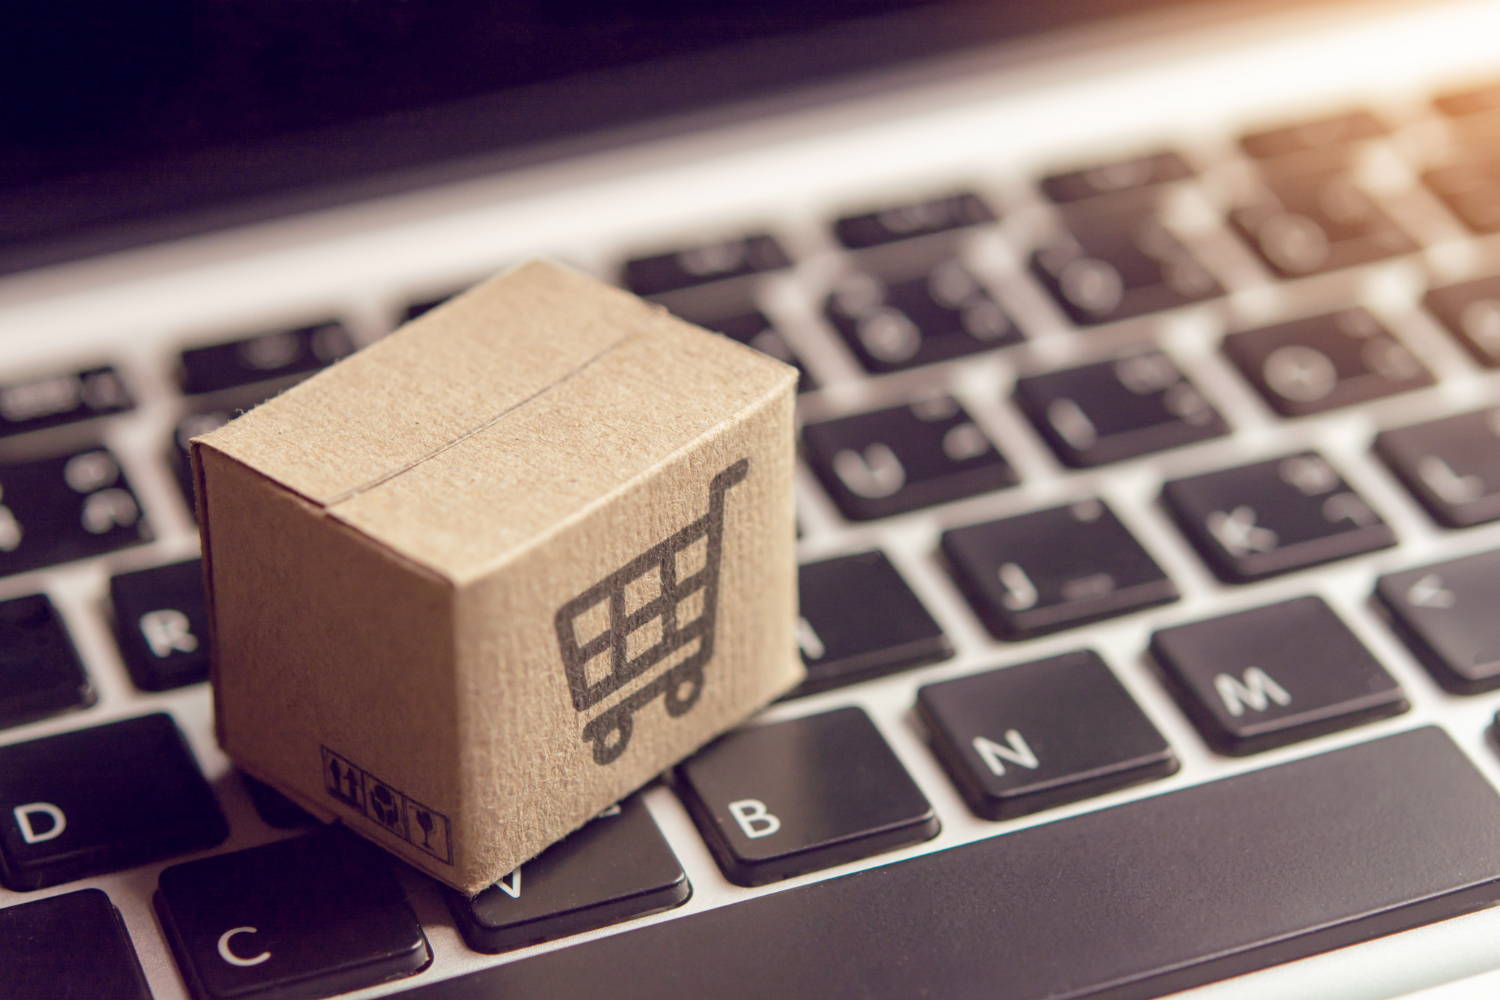 online-shopping-paper-cartons-or-parcel-with-shopping-cart-logo-on-laptop-keyboard